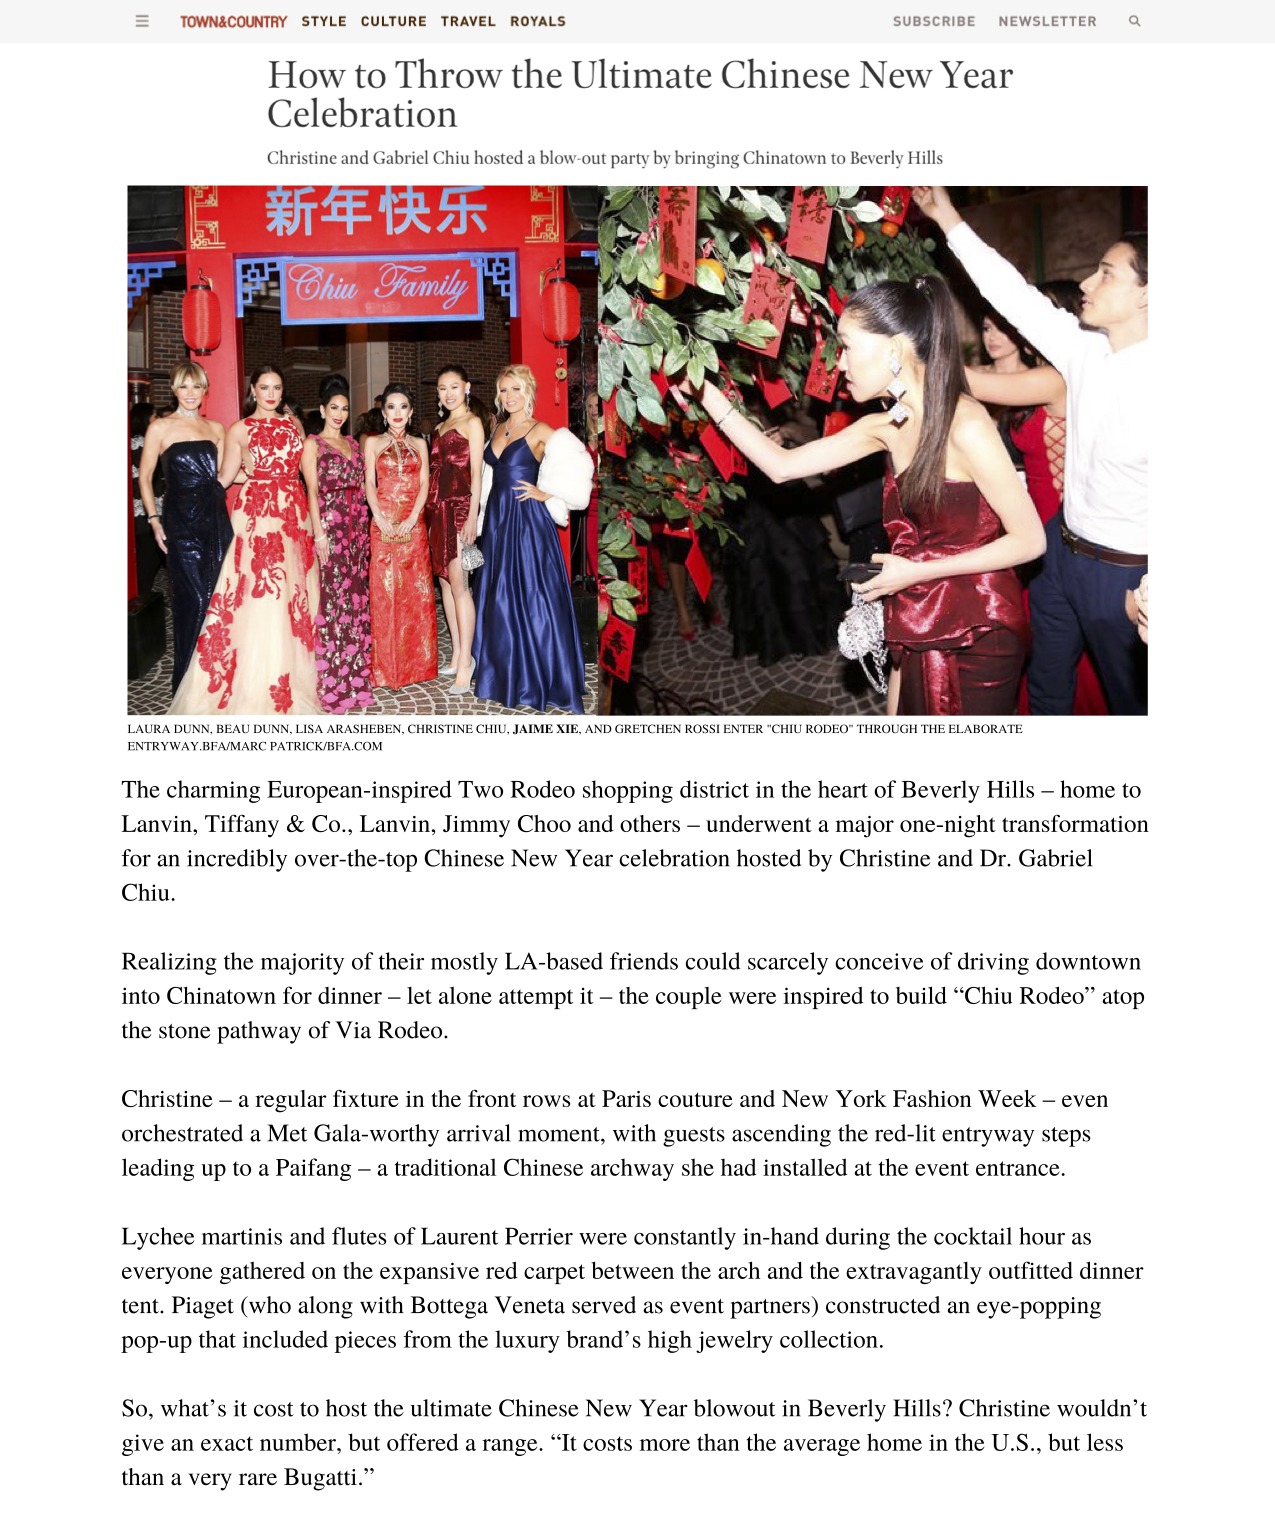 Town & Country: How to Throw the Ultimate Chinese New Year Celebration